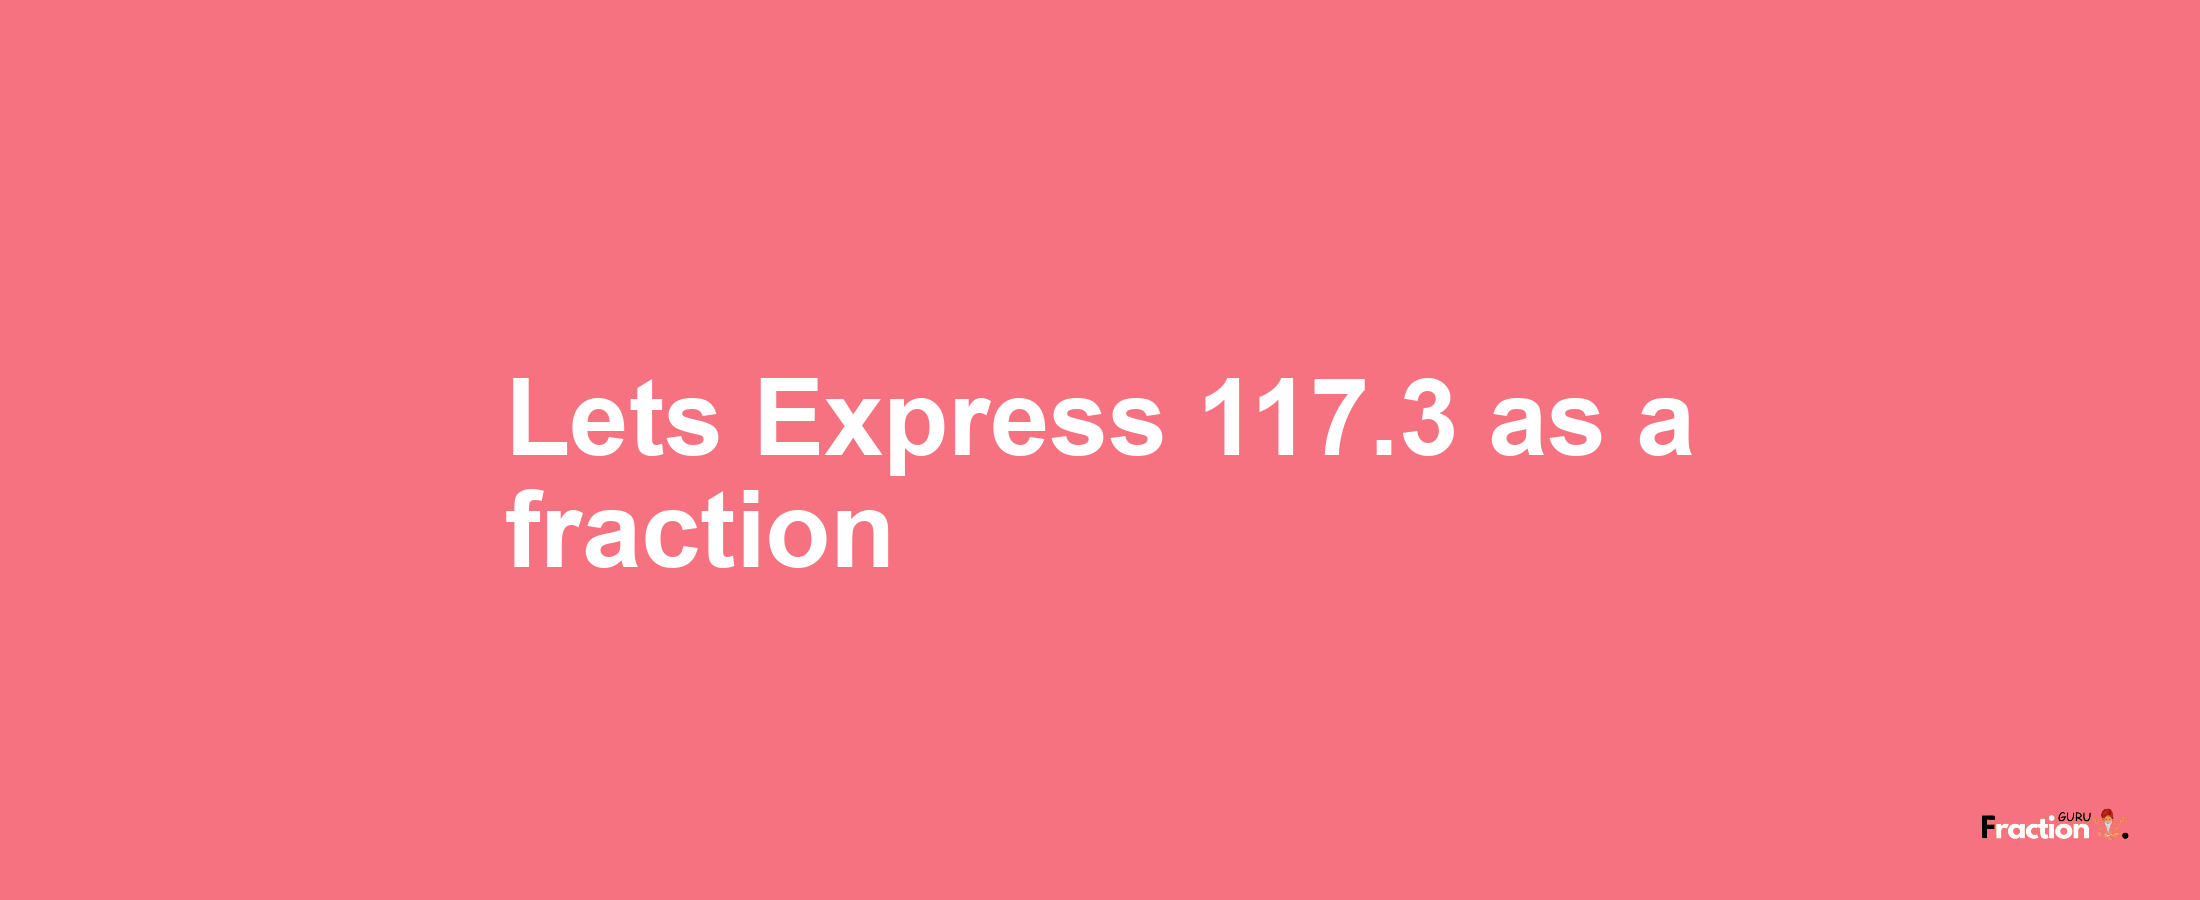 Lets Express 117.3 as afraction